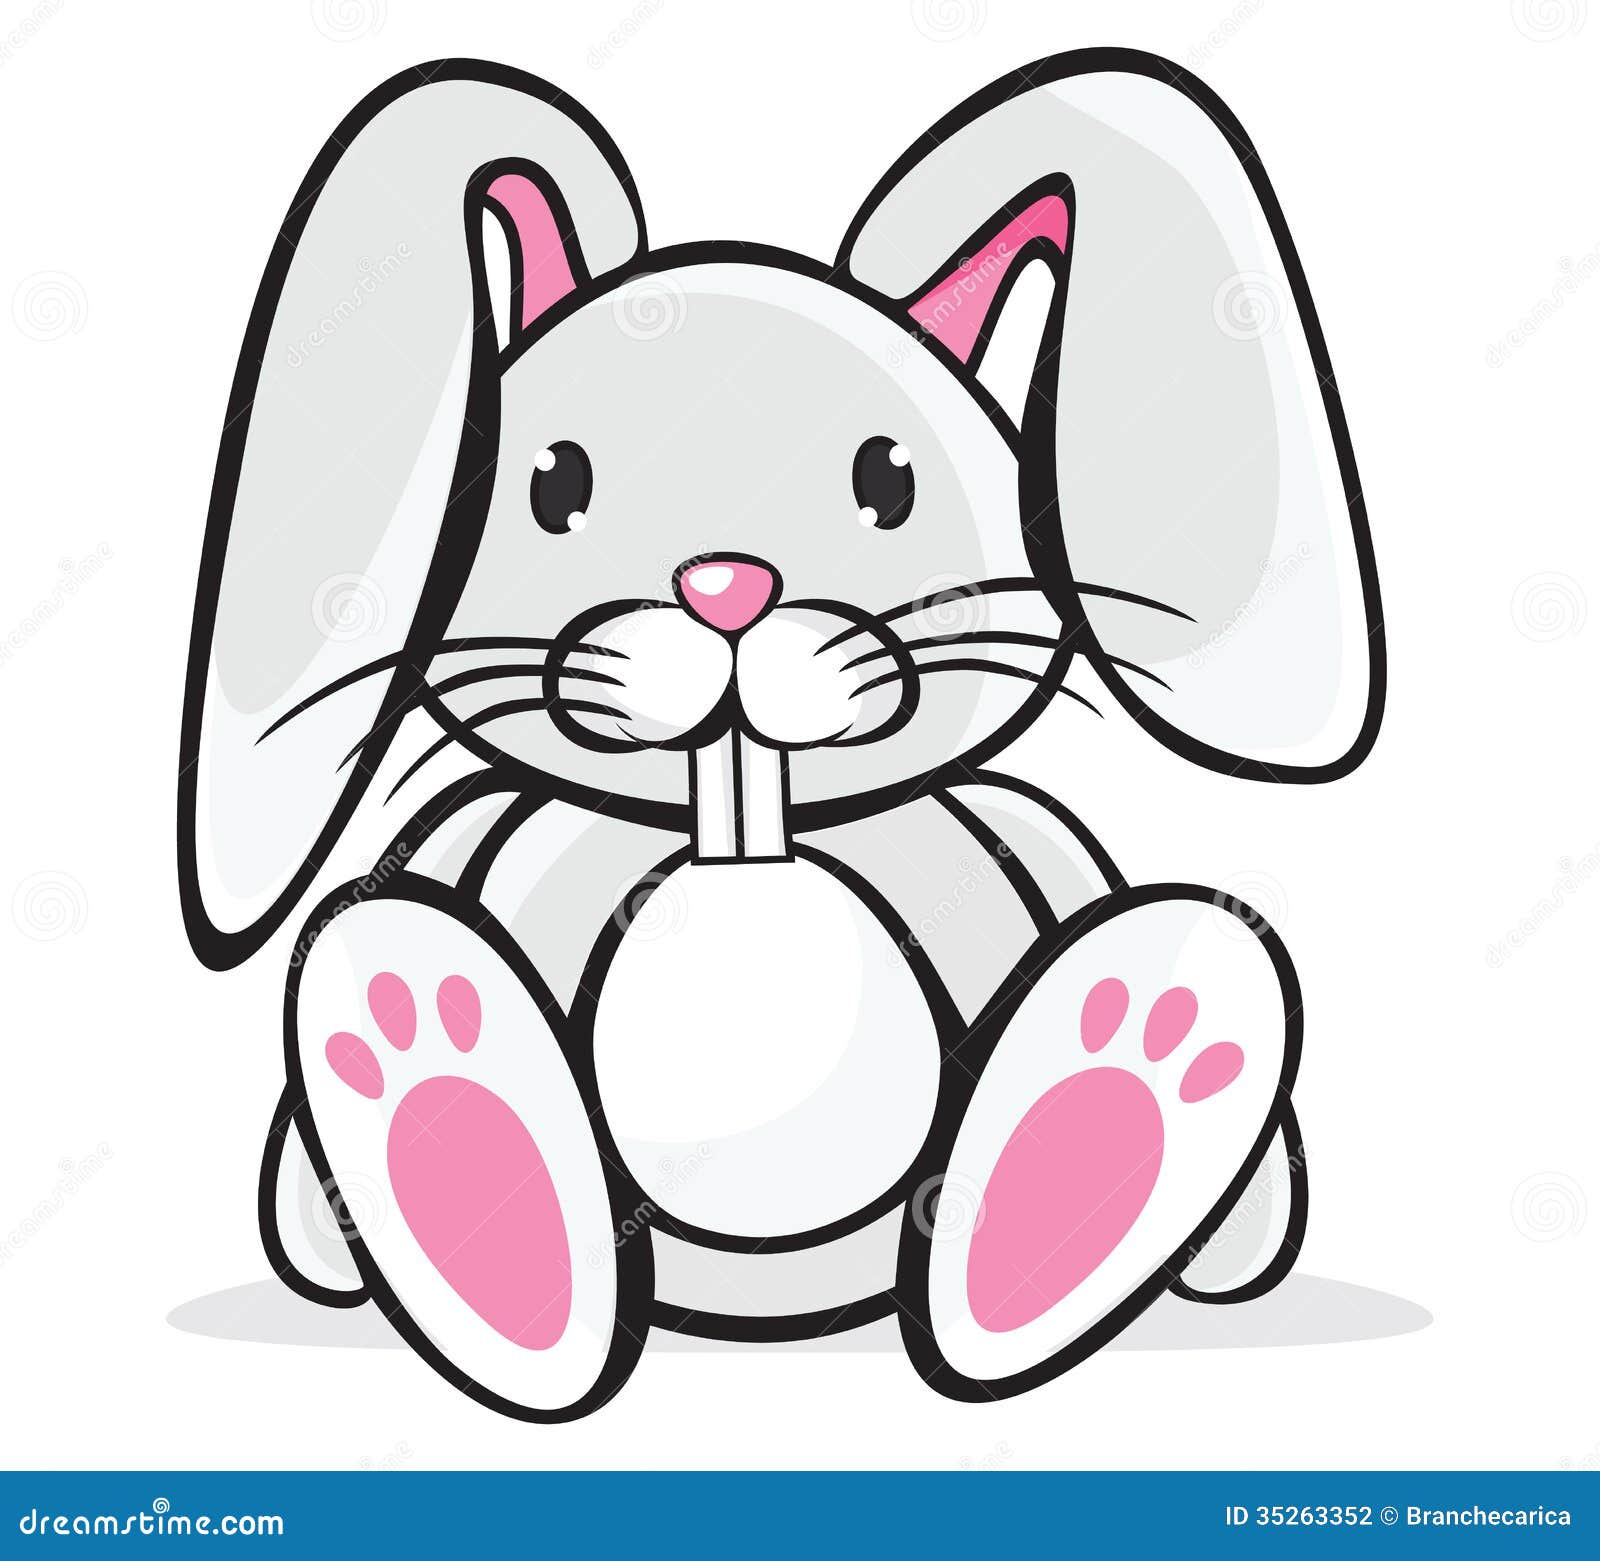 Download Cute Rabbit Stock Photography - Image: 35263352